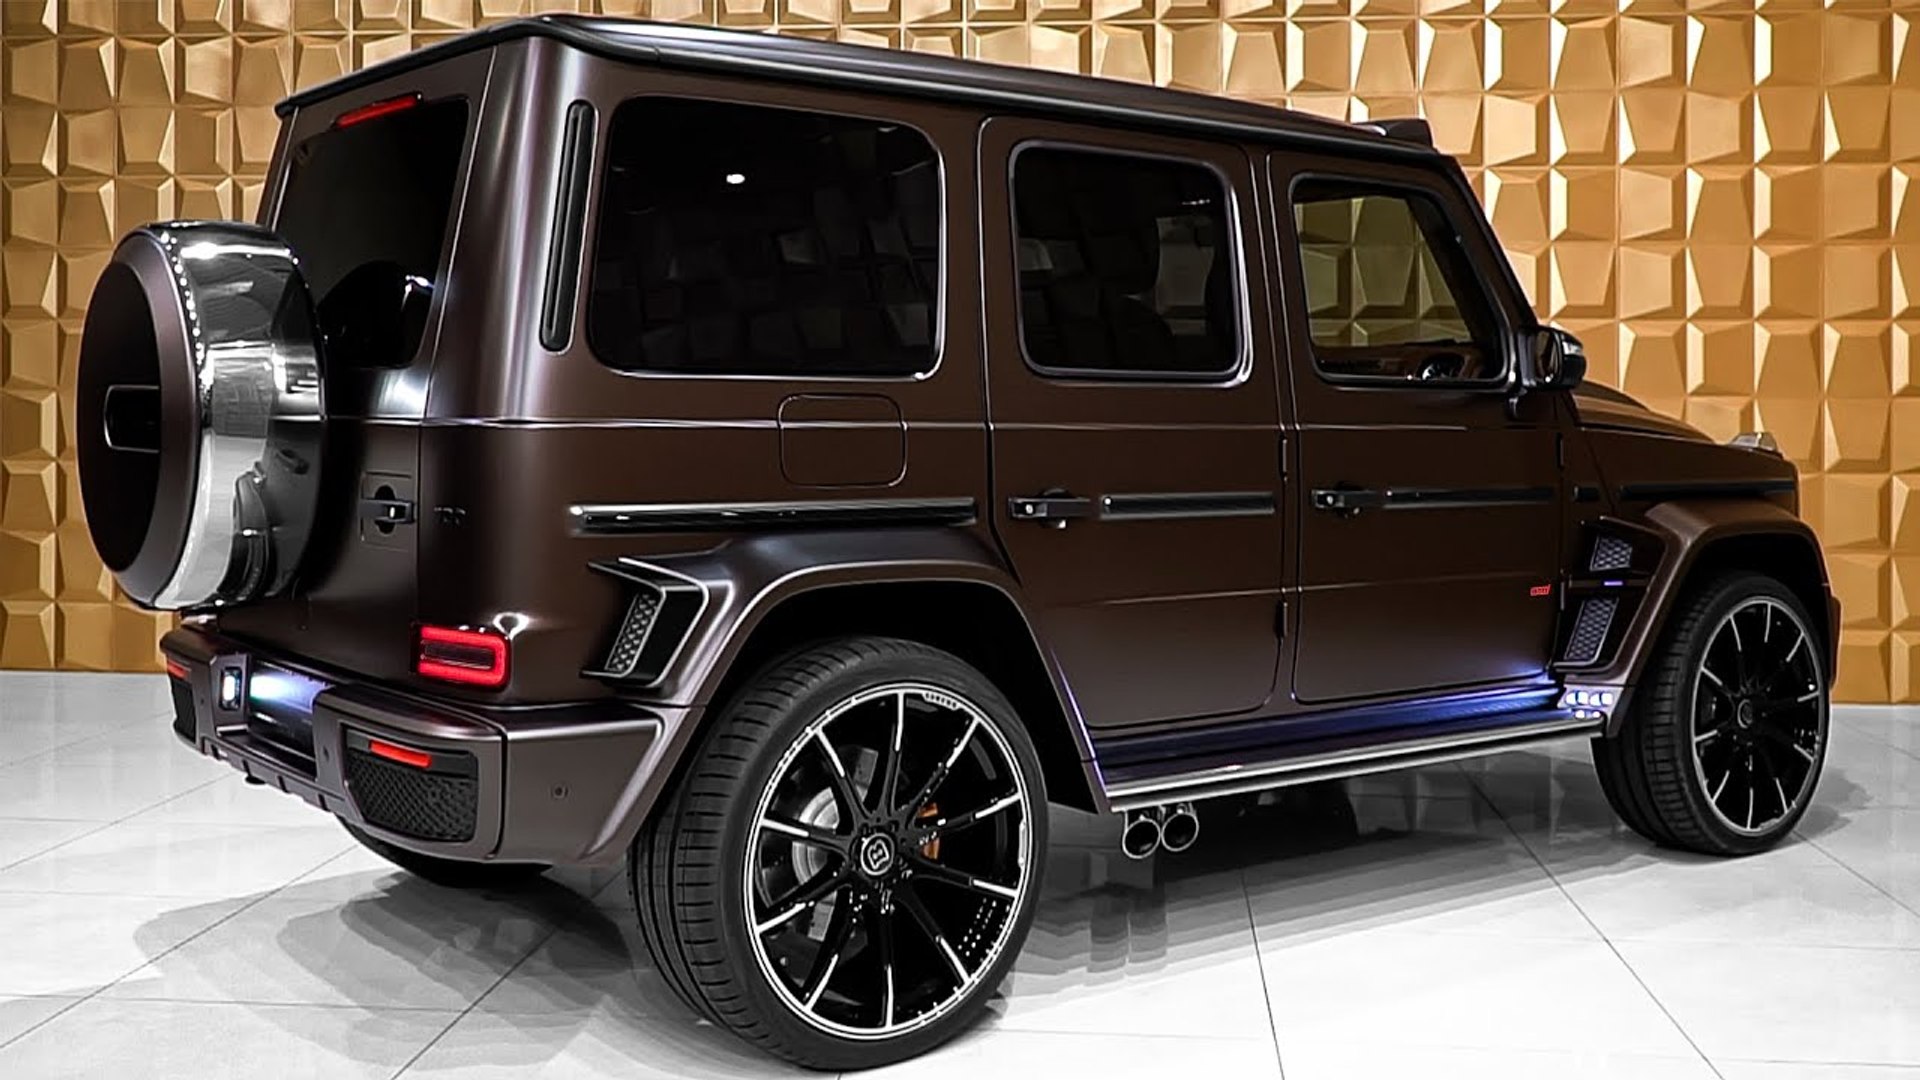 Brabus 700 Mercedes Amg G 63 In Magno Citrizin Brown Video Dailymotion